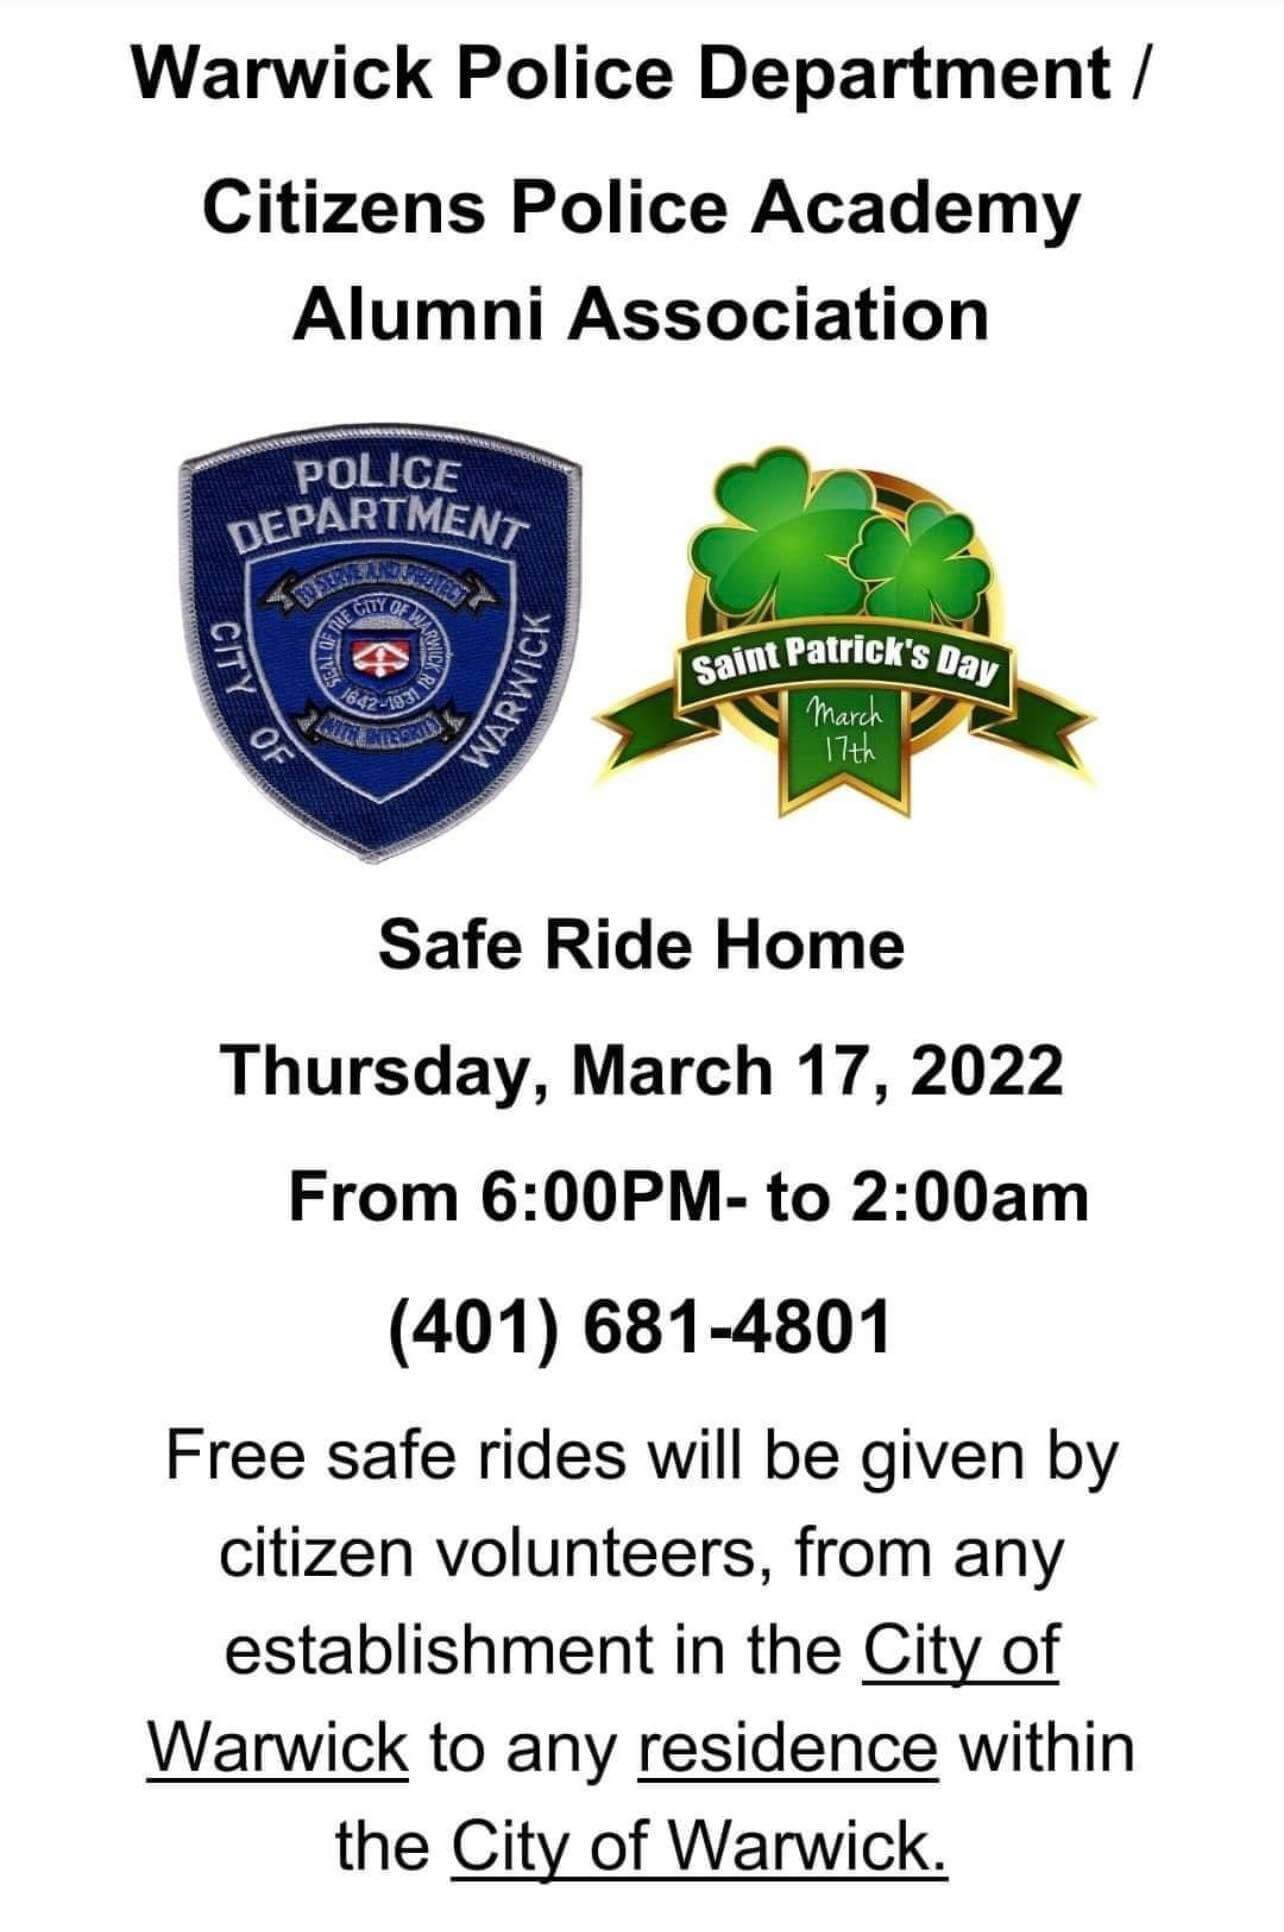 [CREDIT: WPD] The volunteer-driven WPD Safe Rides Program is back getting people safely home this St. Patrick's Day.